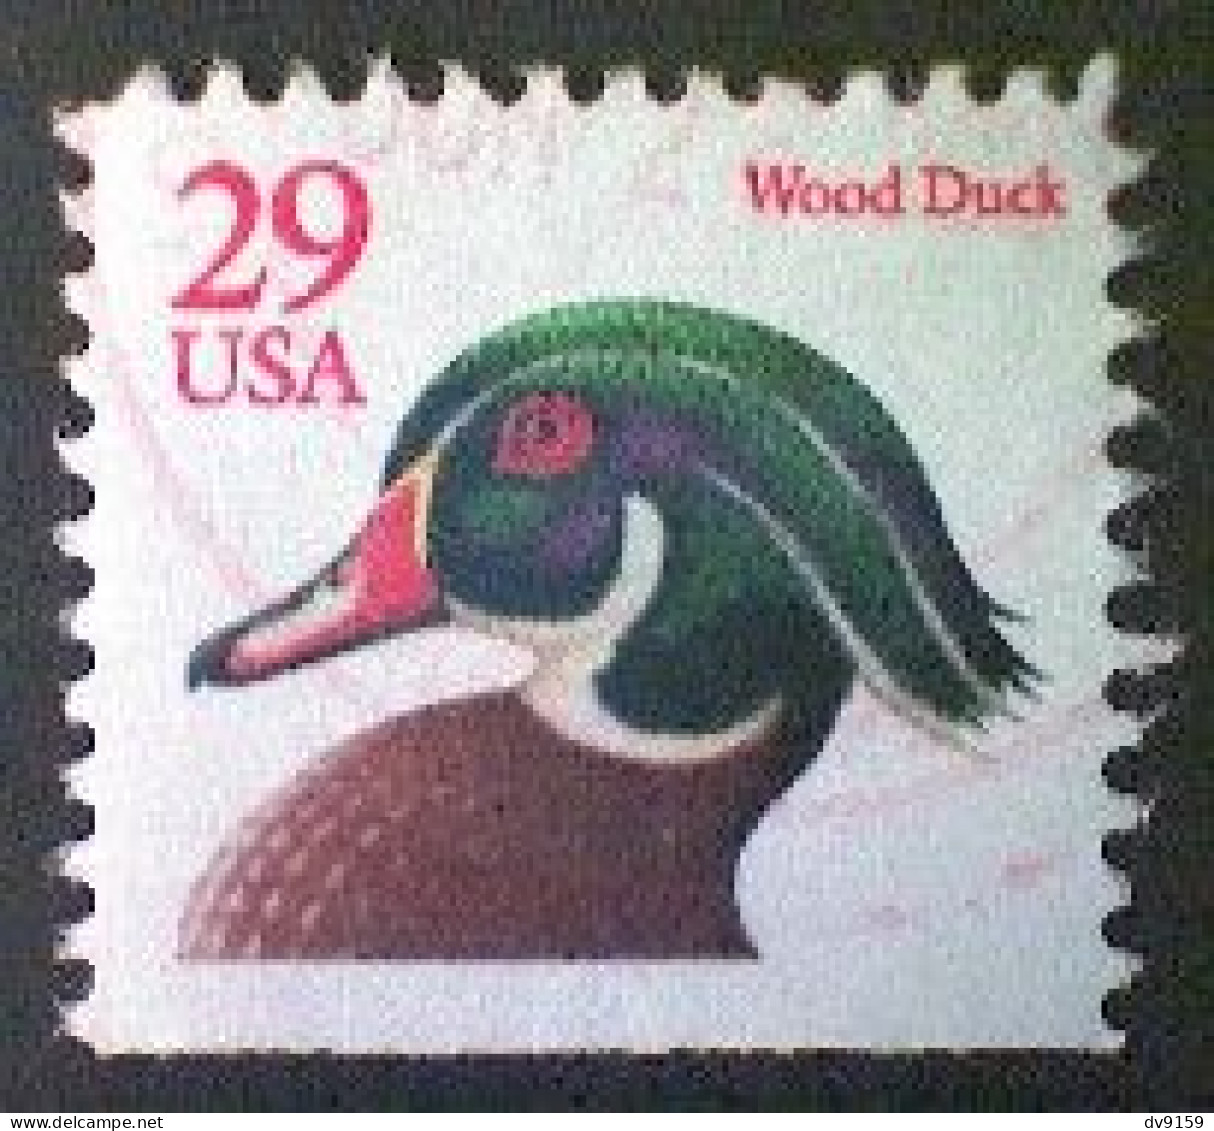 Stamps, United States, Scott #2485, Used(o), 1991,  Wood Duck Definitive, 29¢, Multicolored - Oblitérés